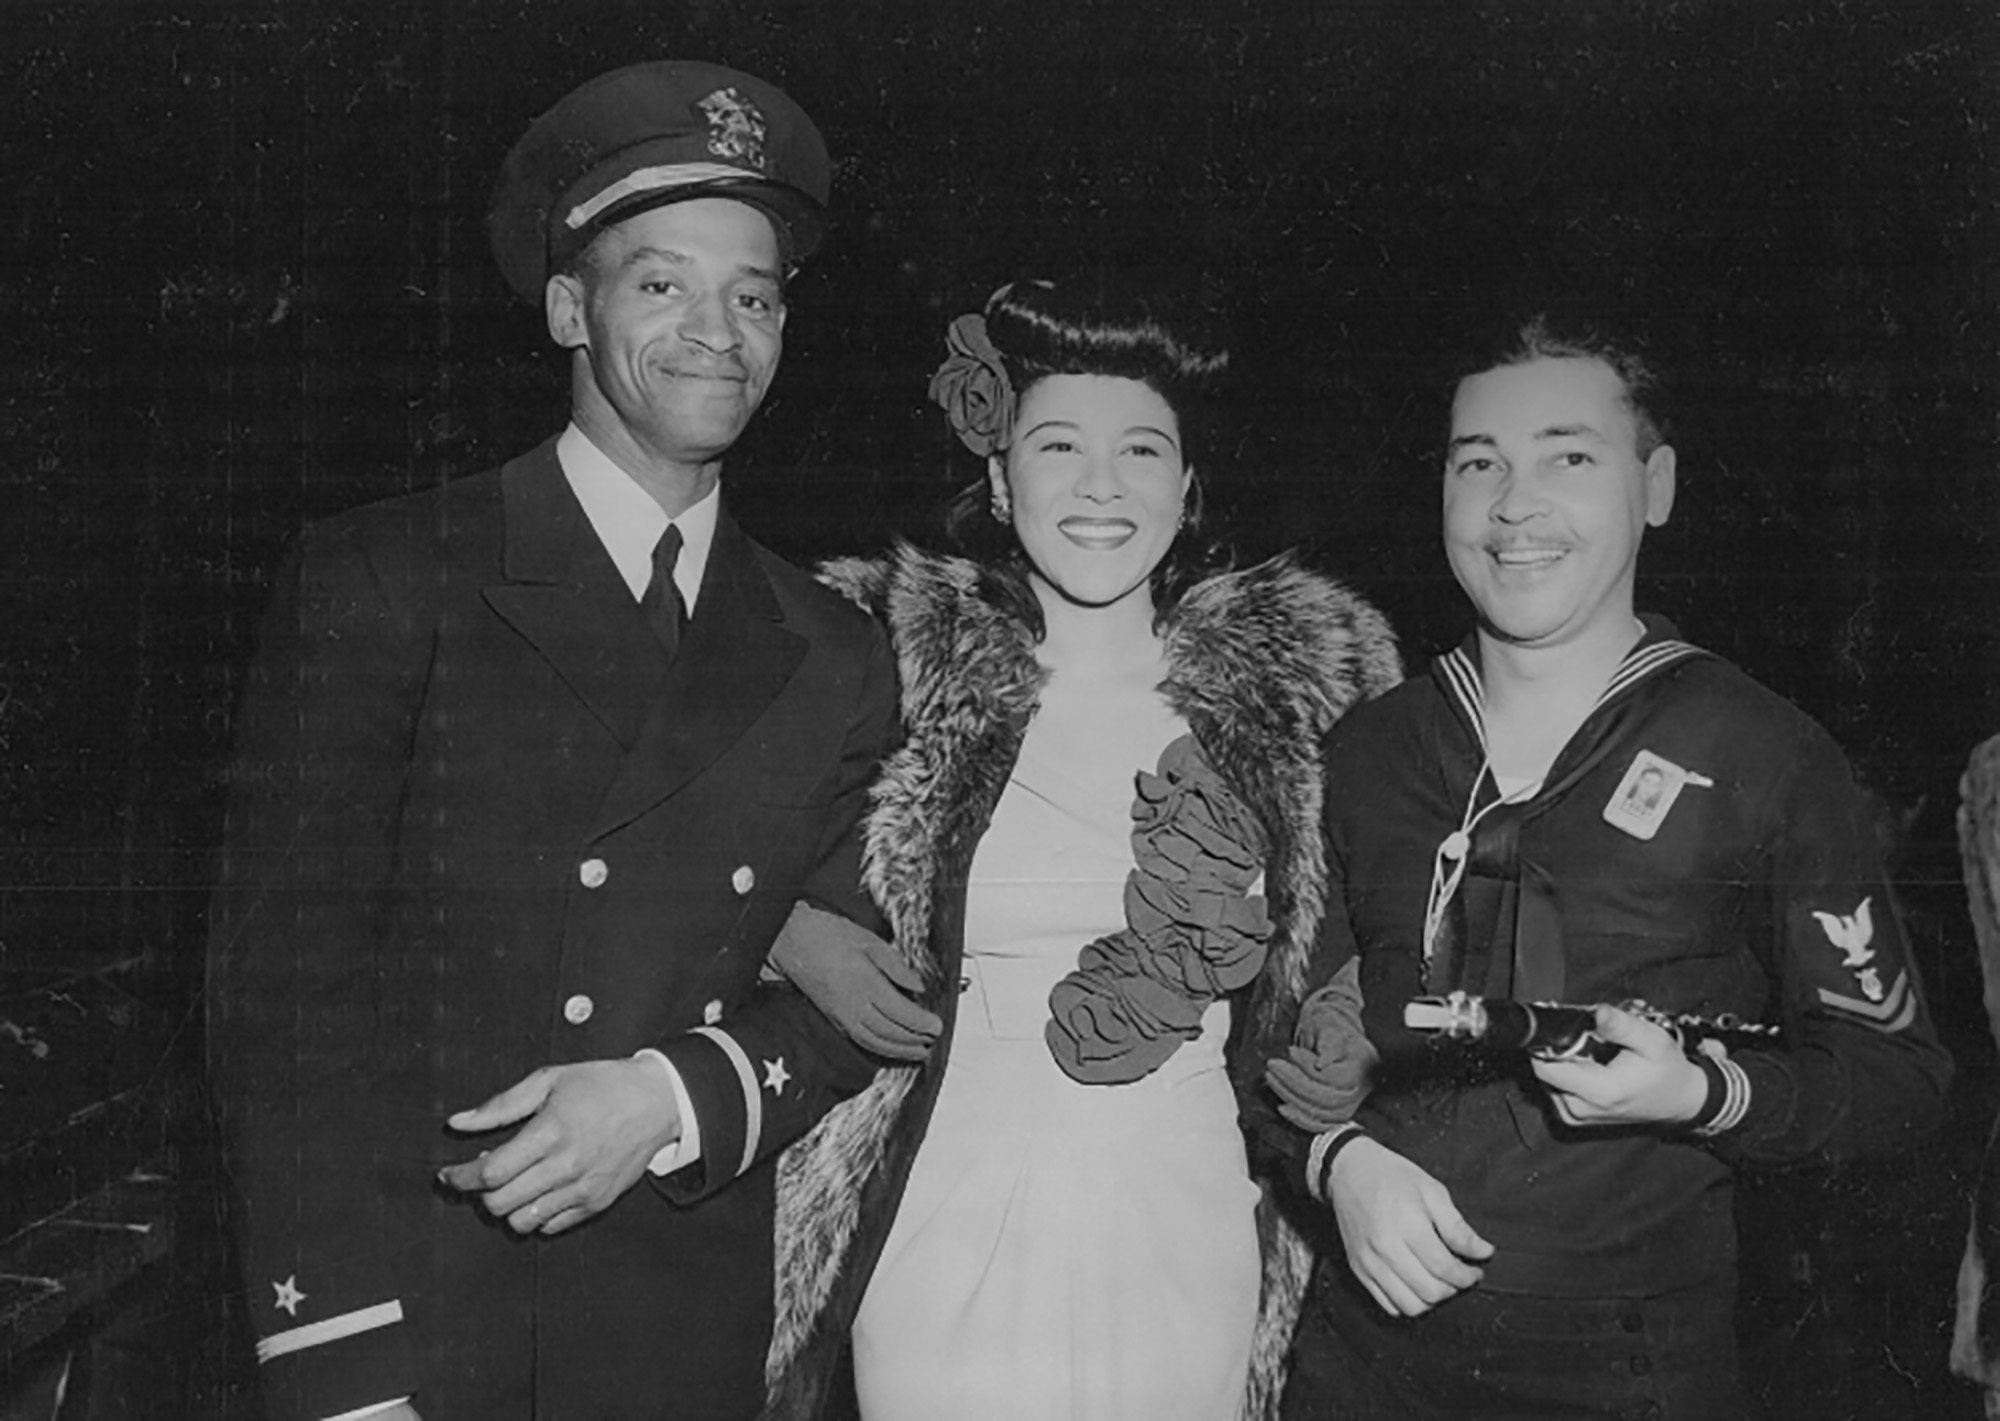 Marva Louis, wife of heavyweight champion Joe Louis, entertained some two thousand black men in April 1944 at the Naval Training Station, Great Lakes. She is shown here with Ensign Sam Barnes and Willie Smith, musician second class, a nationally known saxophone player.